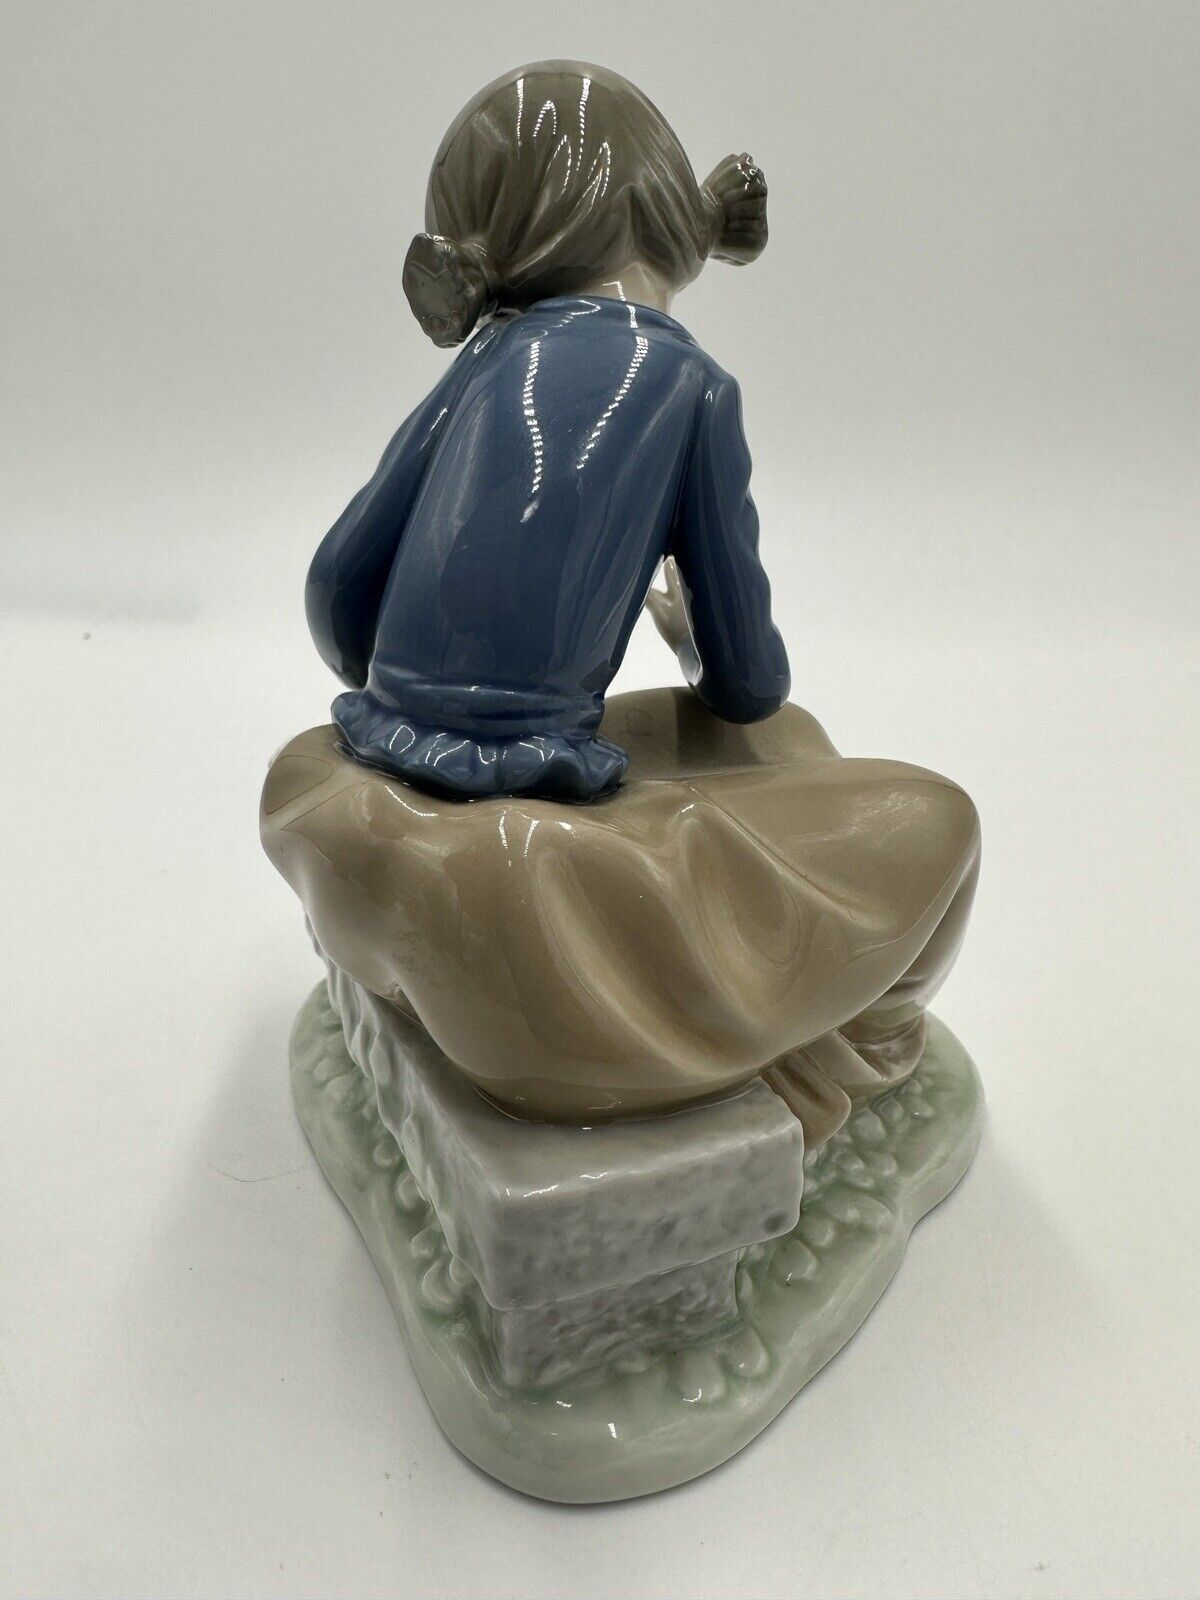 NAO Lladro Porcelain Figurine Ever So Gently 1988 Seated Girl with Doves Daisa